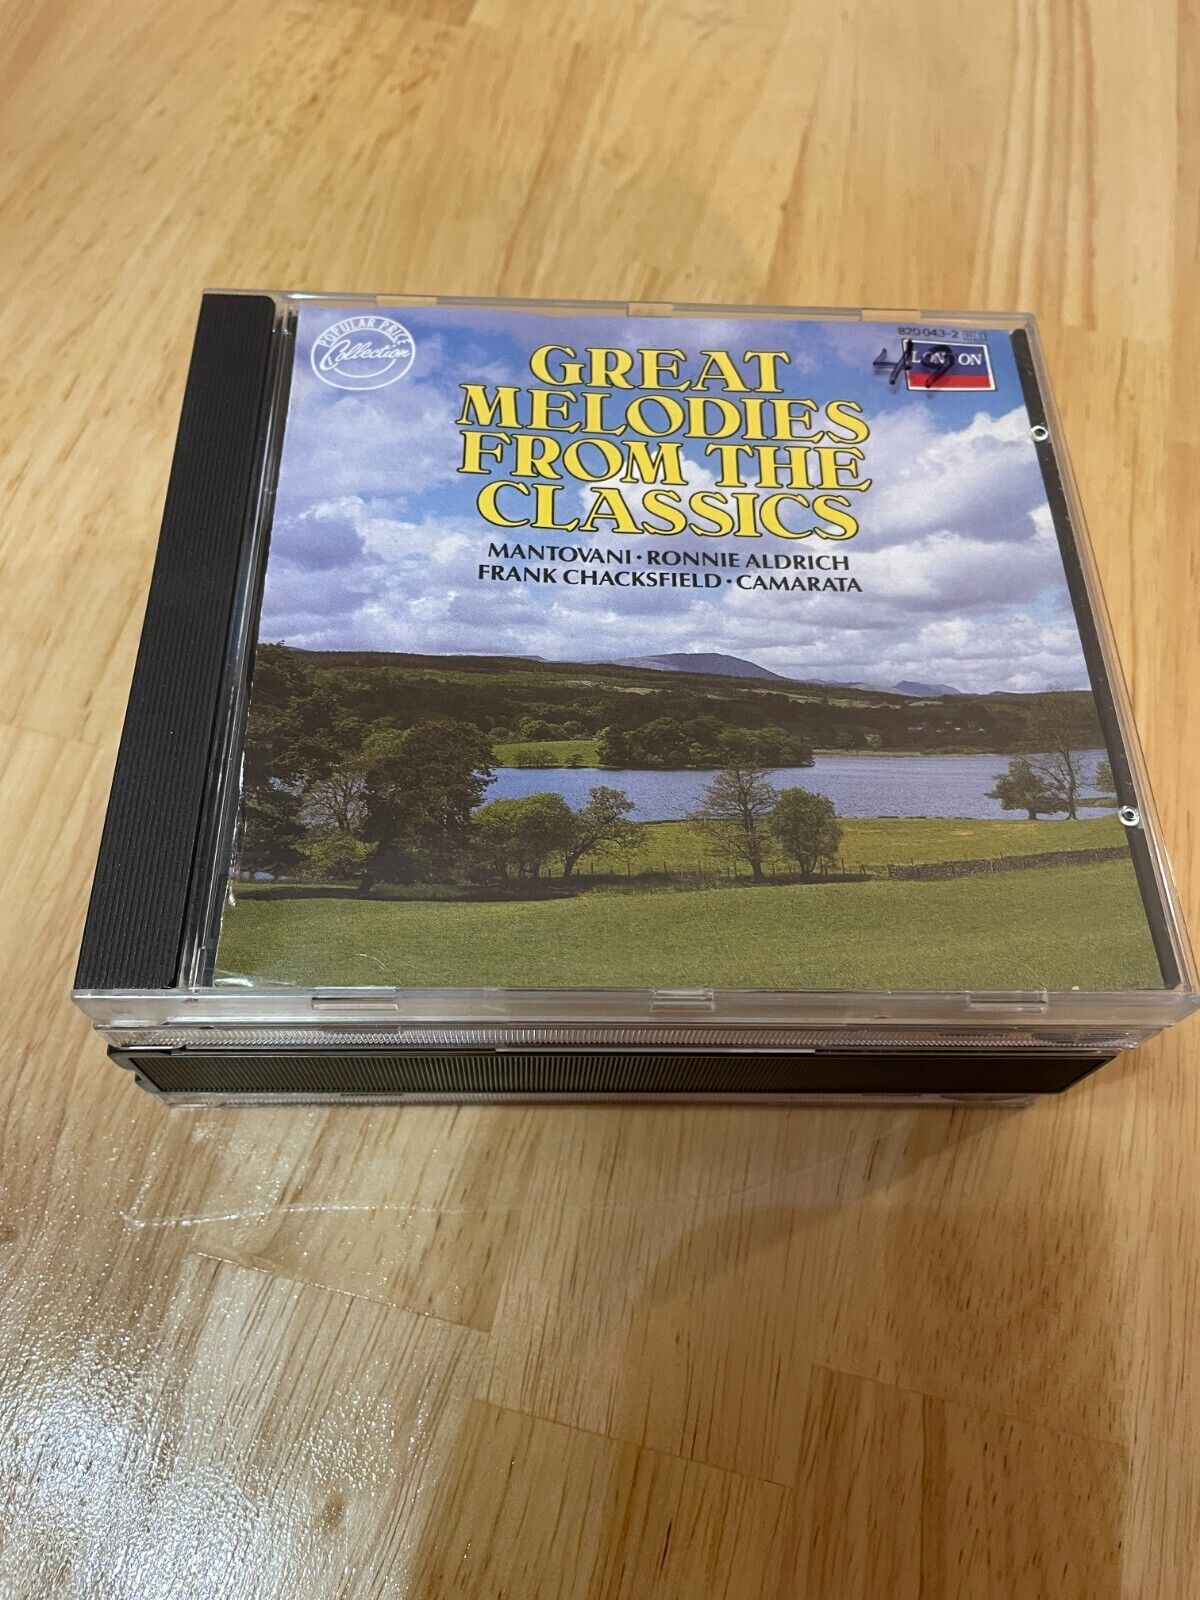 Artist Title:Great Melodies from the Classics:9423  Classical Collection Lots of Bach!!!! 250 CD's Nothing over 3.50 Most 2.50